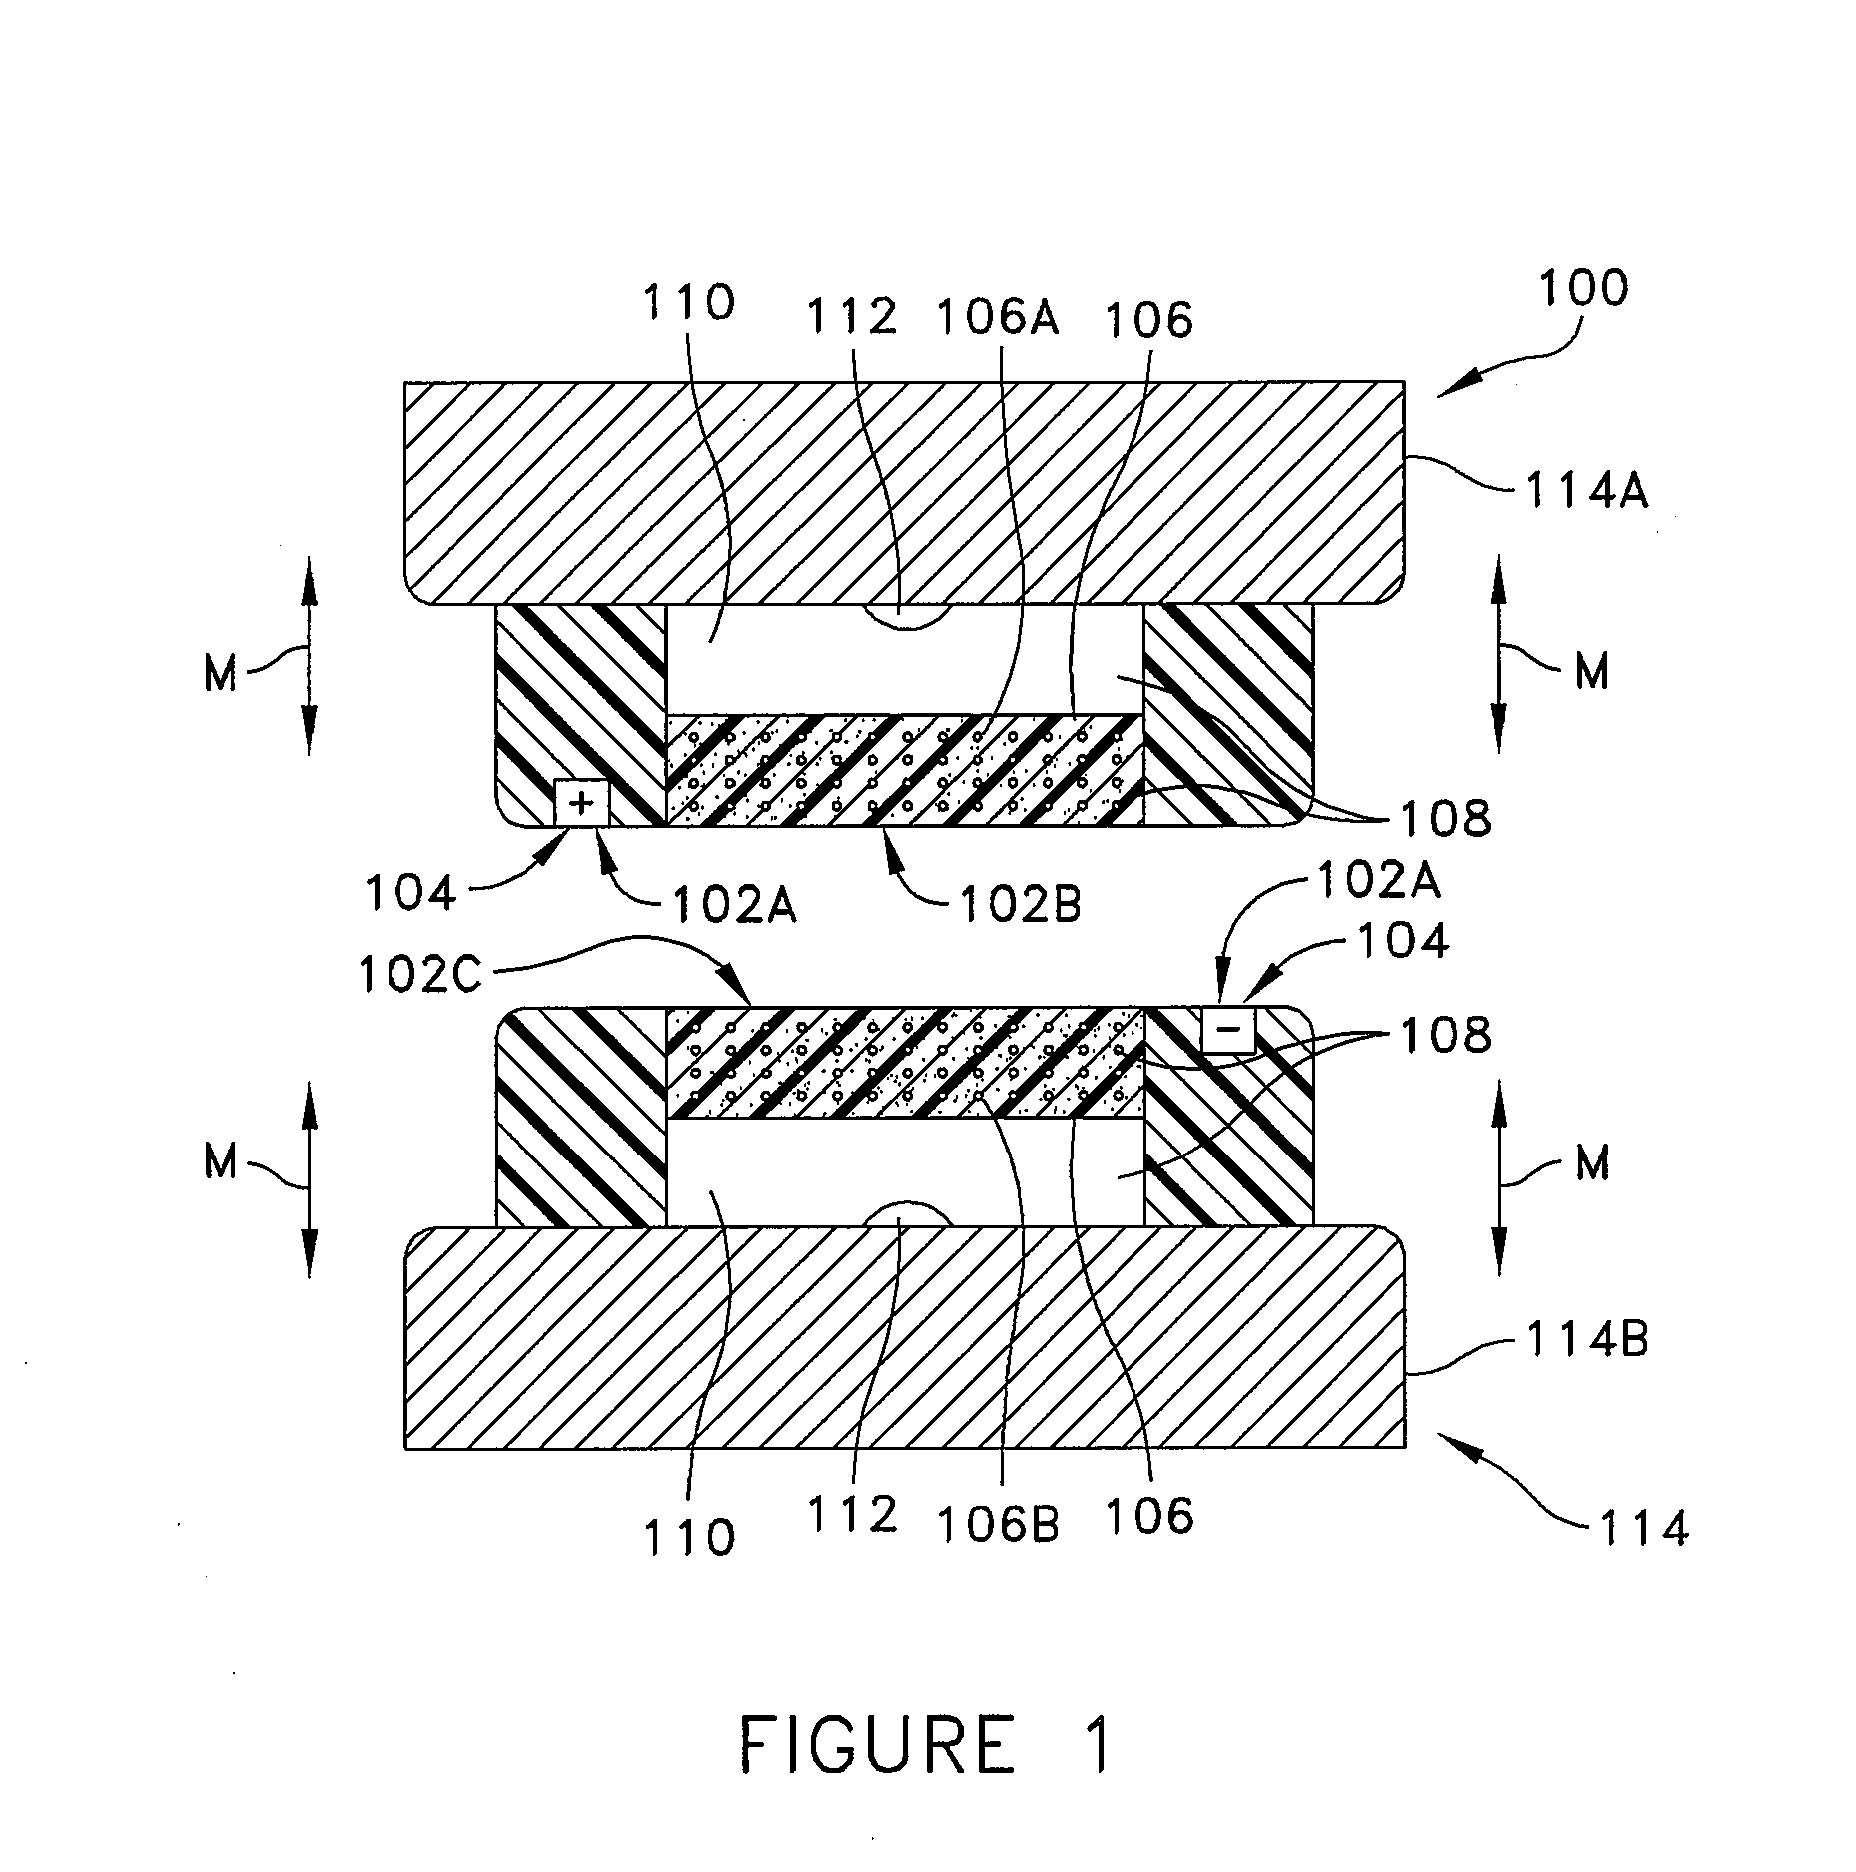 Apparatus for attachment and reinforcement of tissue, apparatus for reinforcement of tissue, methods of attaching and reinforcing tissue, and methods of reinforcing tissue